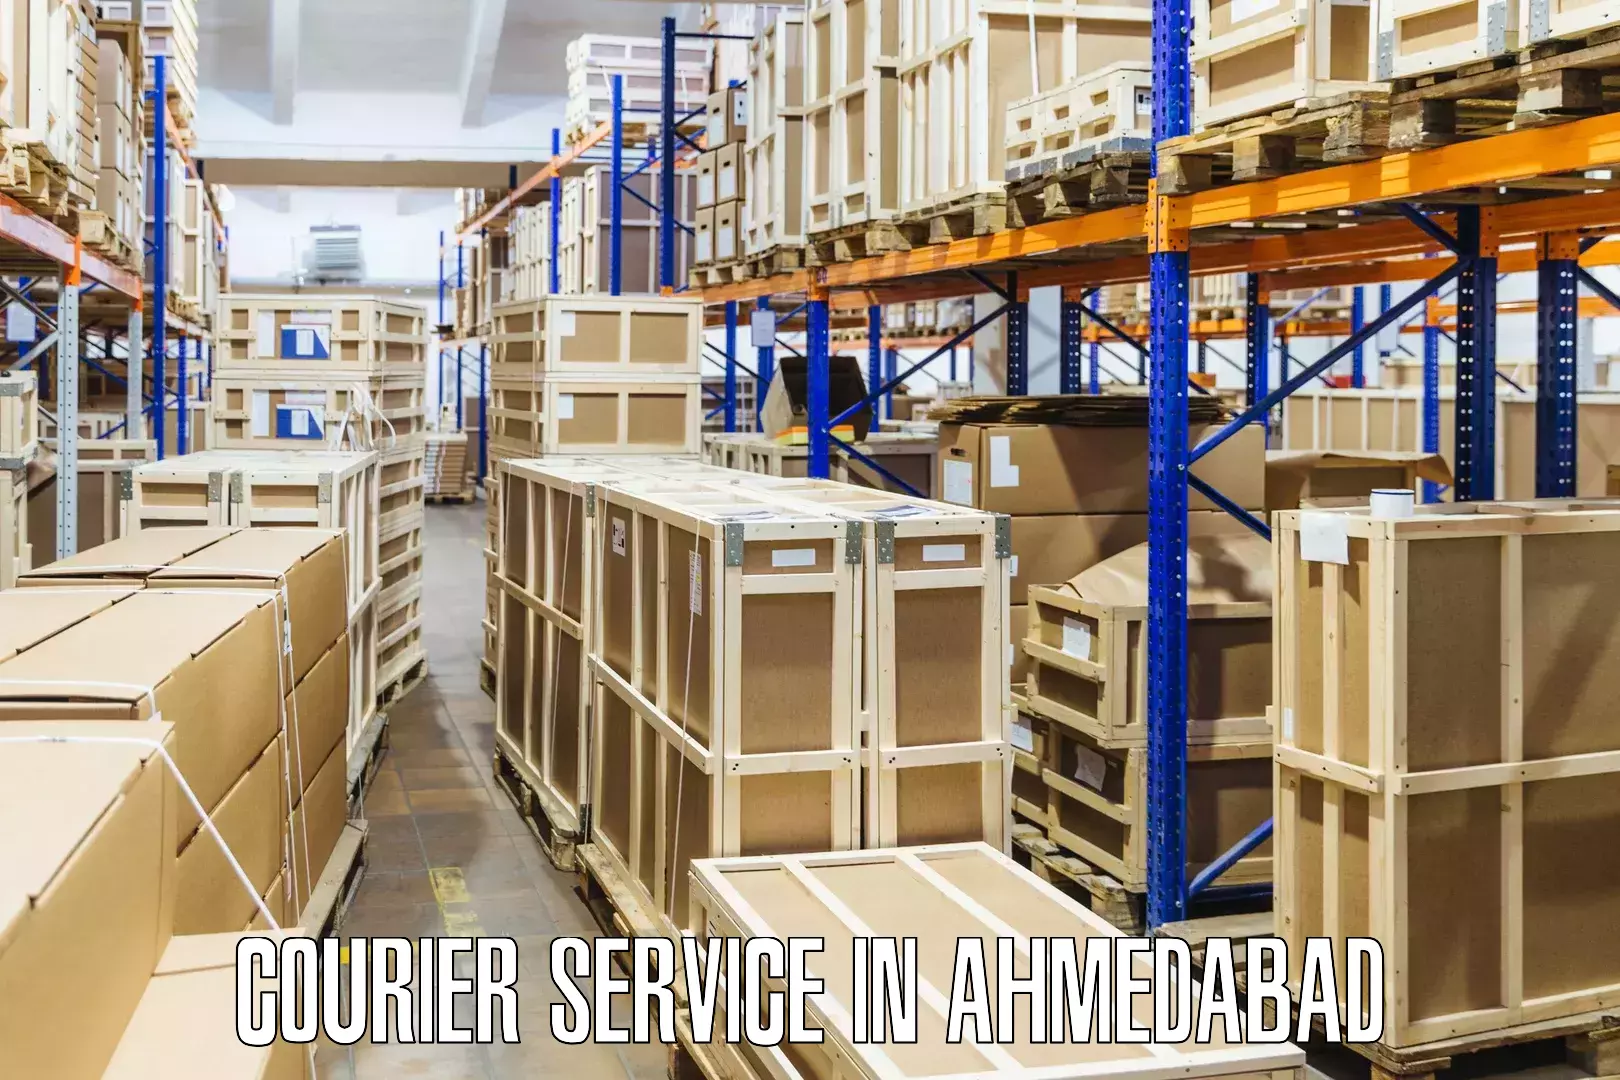 Courier service booking in Ahmedabad